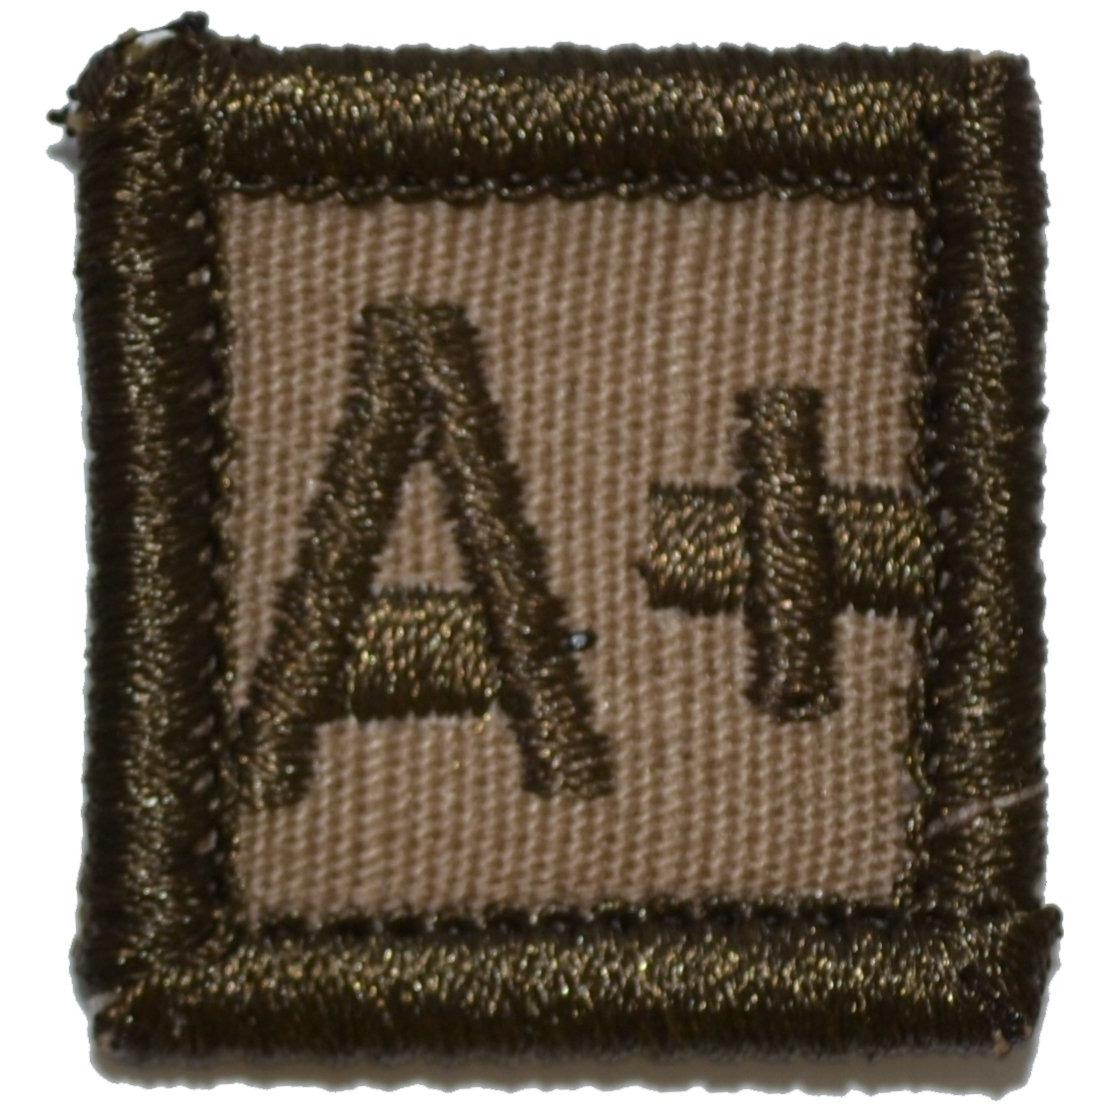 OPT Blood Type Tape Patch